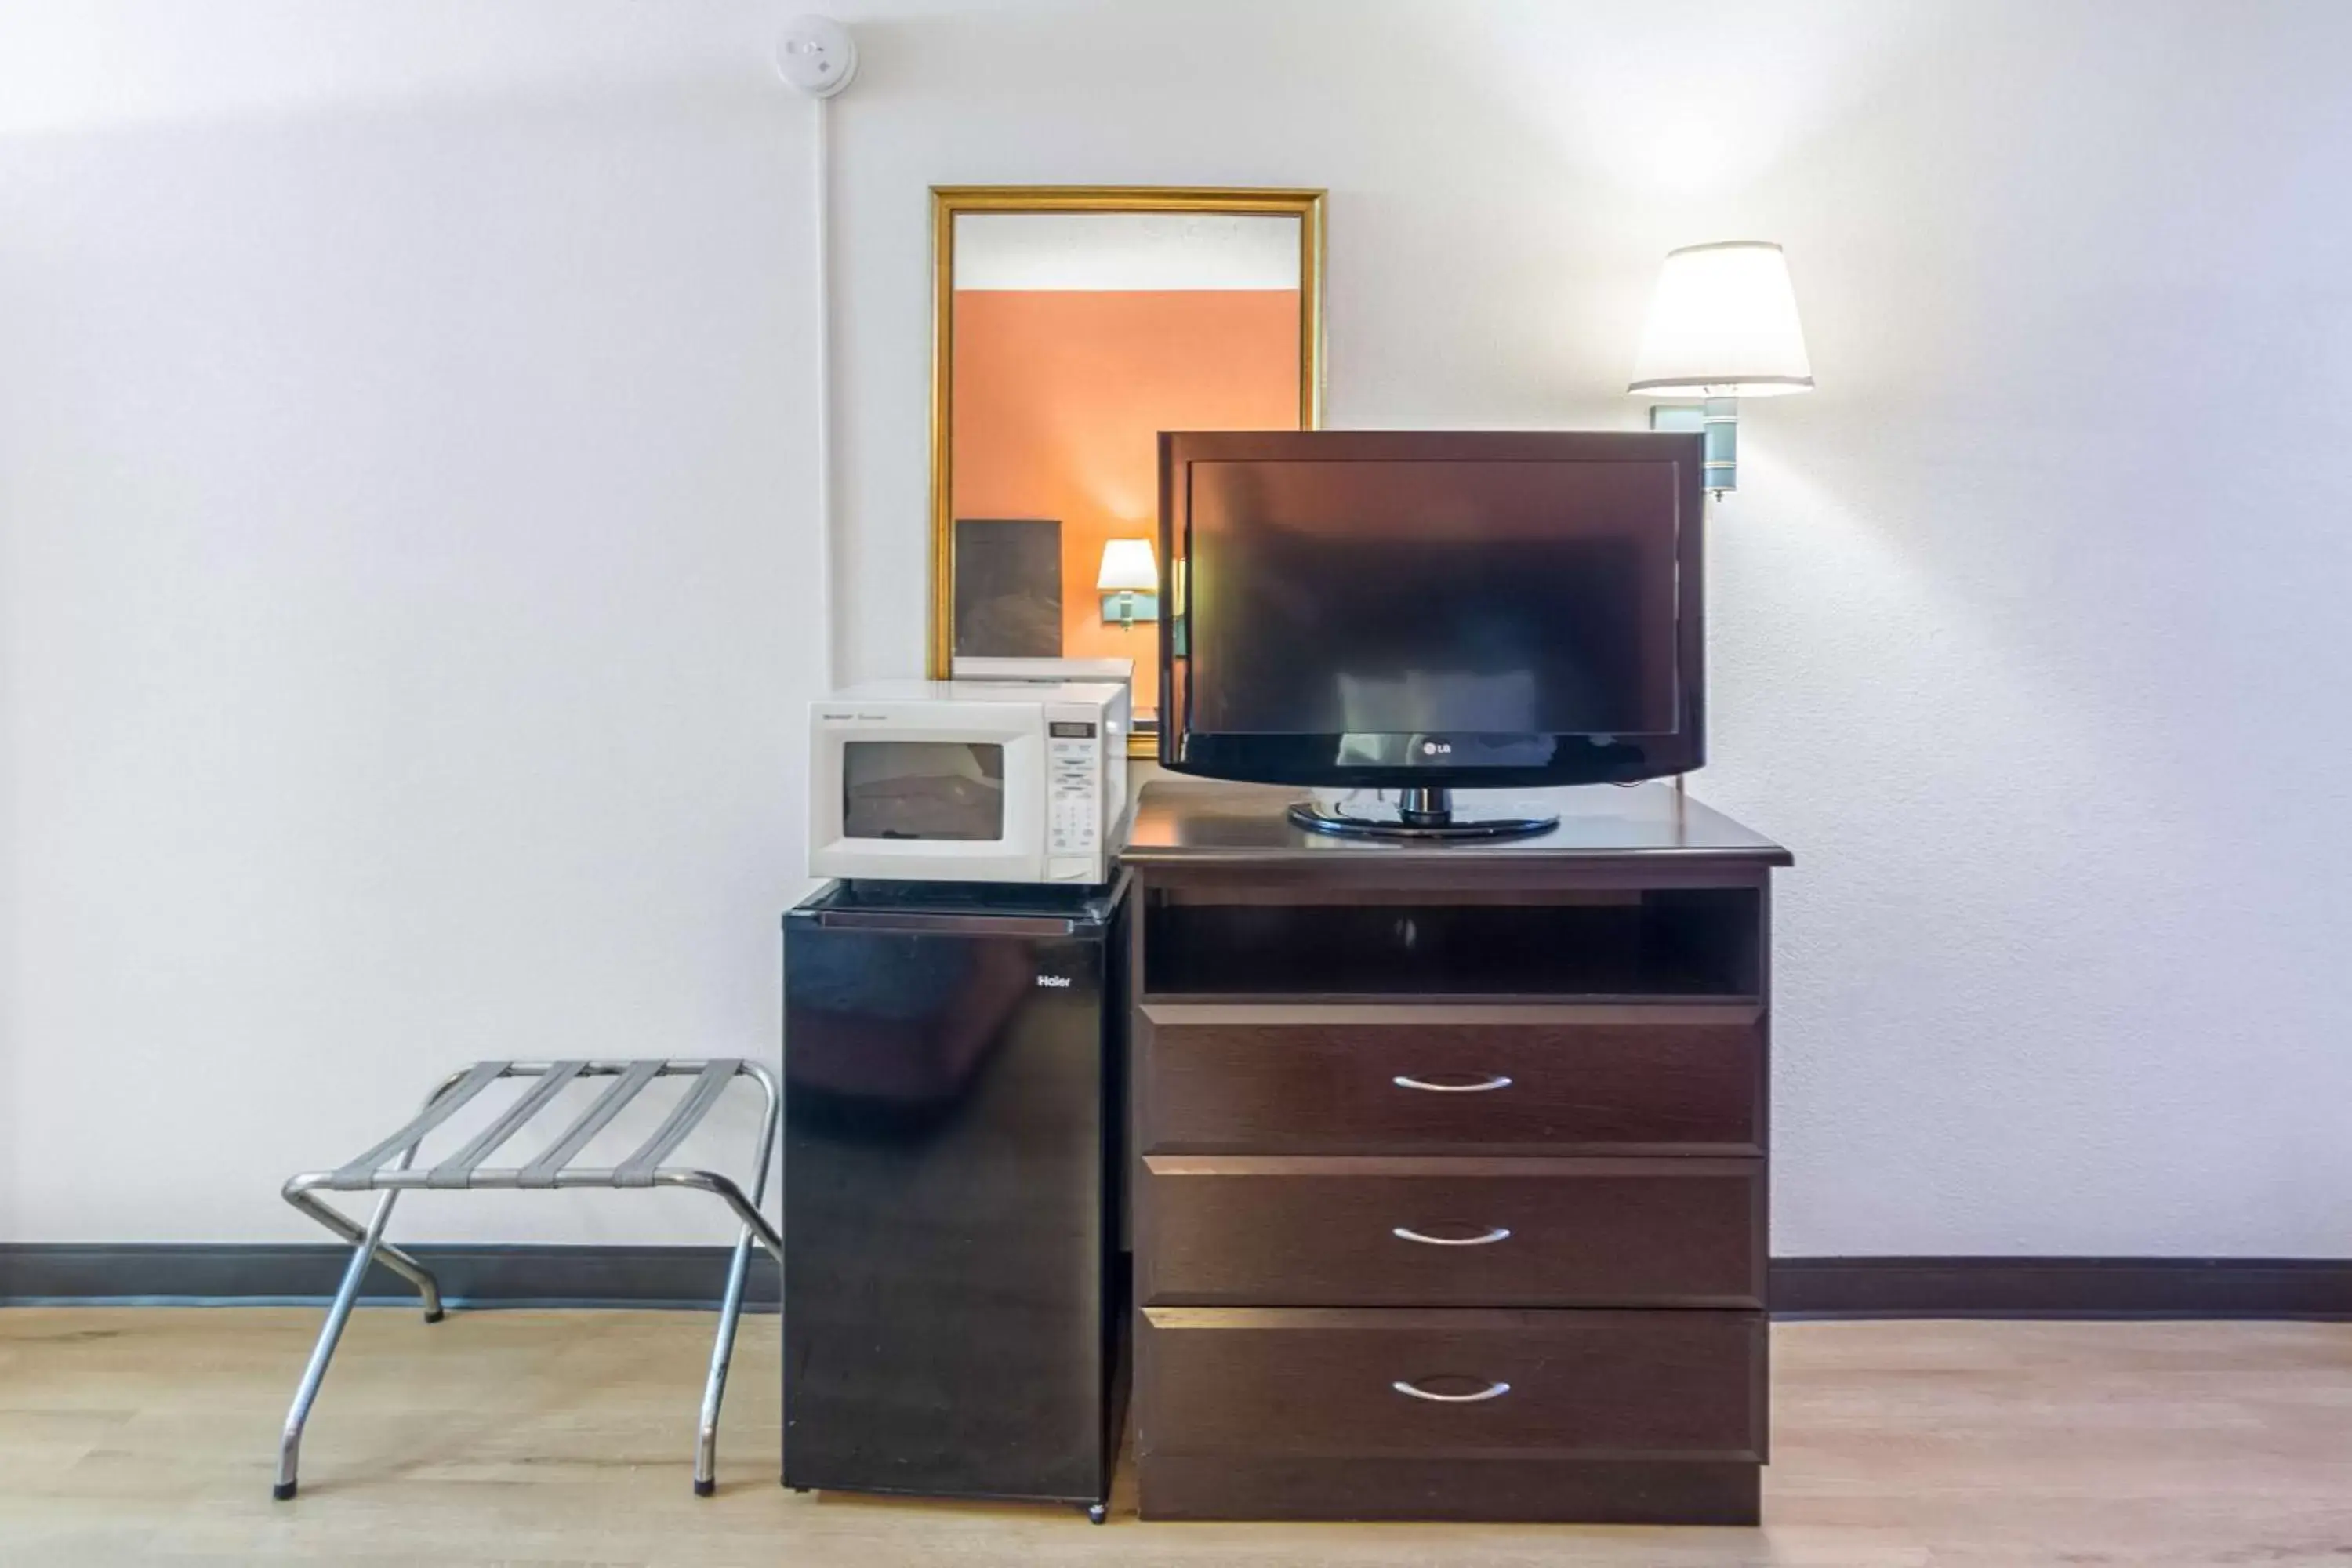 TV and multimedia, TV/Entertainment Center in Motel 6-Groton, CT - Casinos nearby